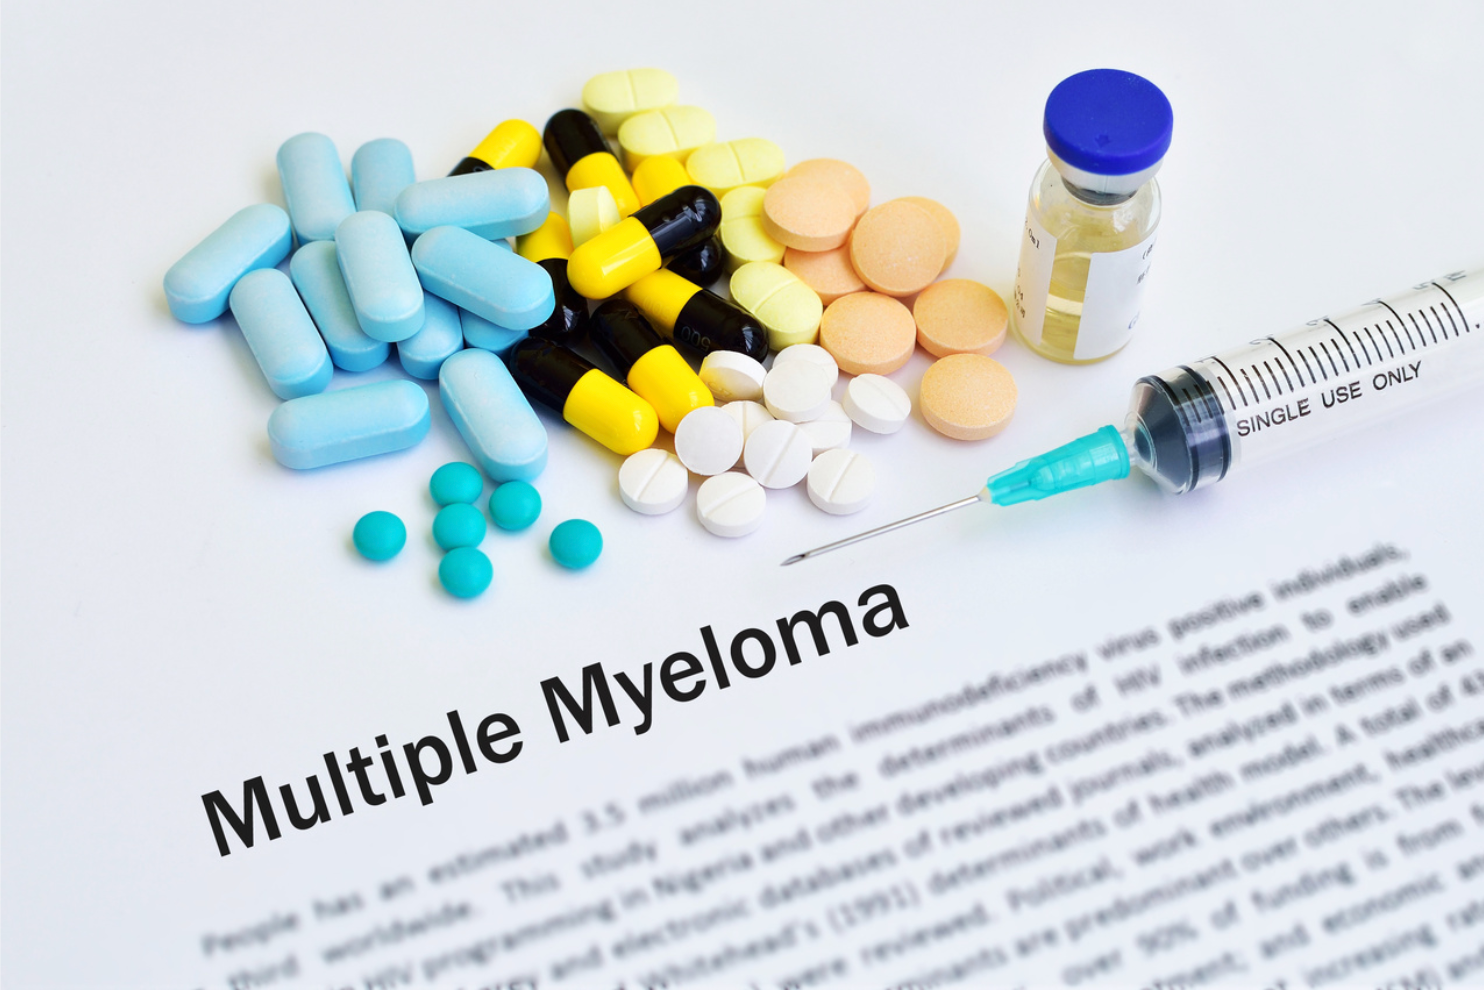 Phase 3 Trial of Ciltacabtagene Autoleucel Meets Primary Endpoint in Relapsed, Refractory Multiple Myeloma